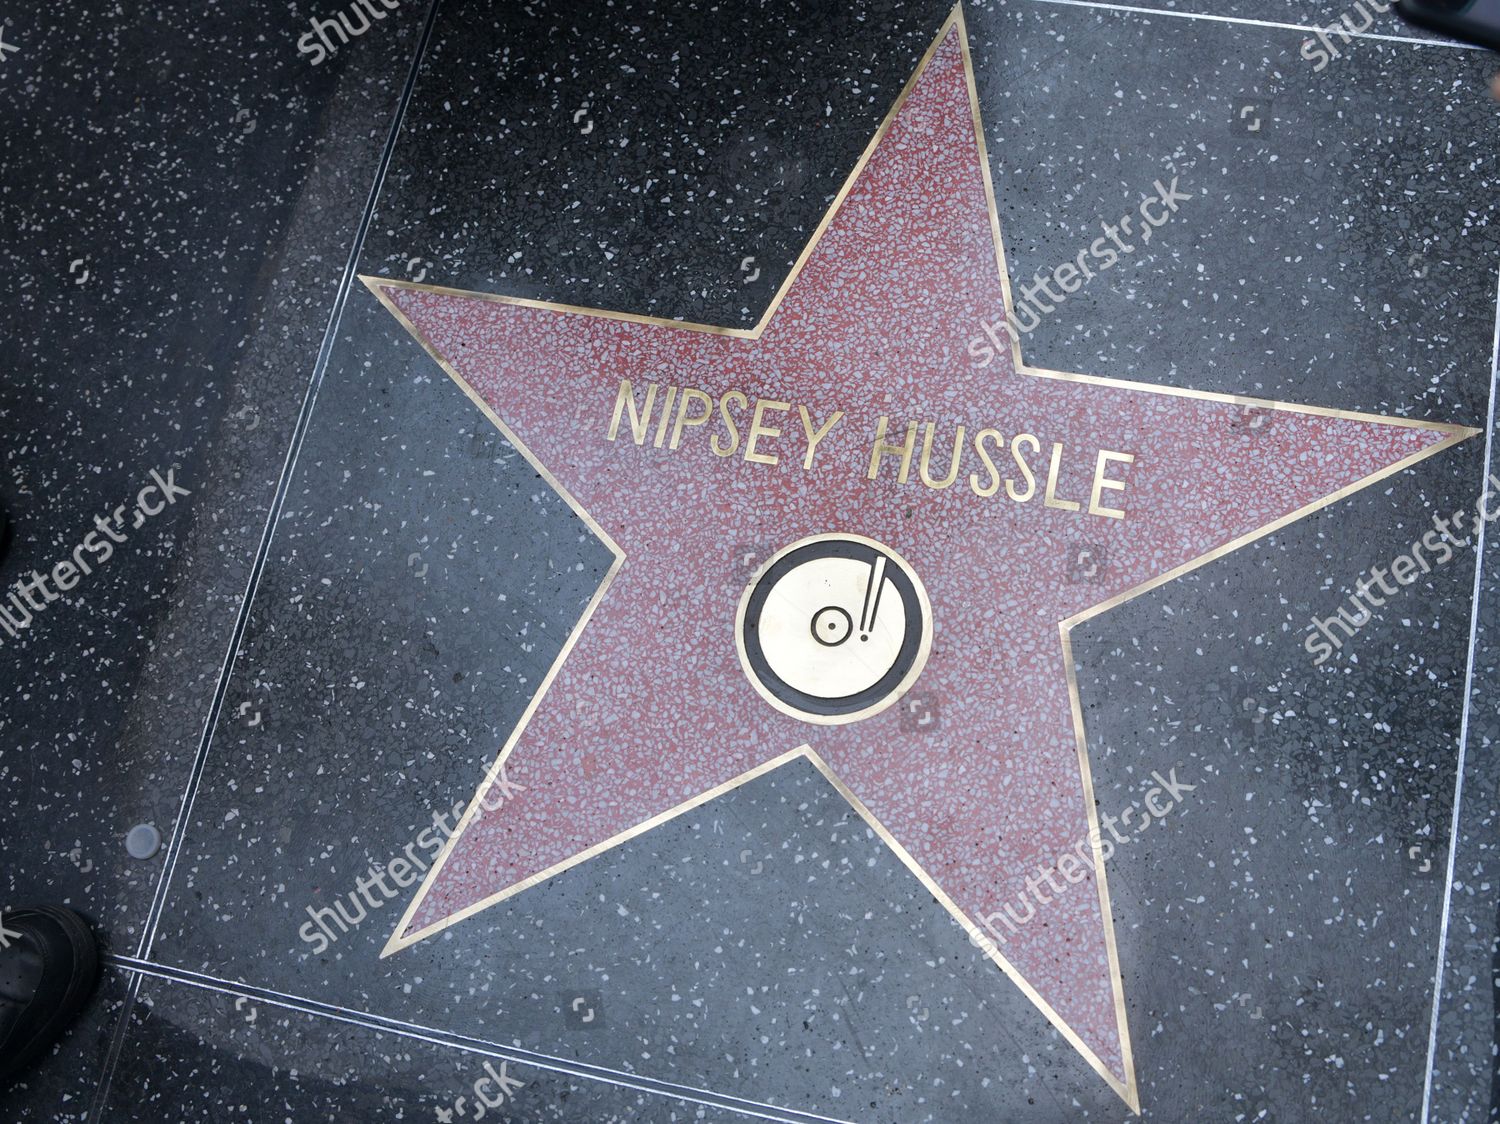 Nipsey Hussle Honored With Hollywood Walk of Fame Star, Special